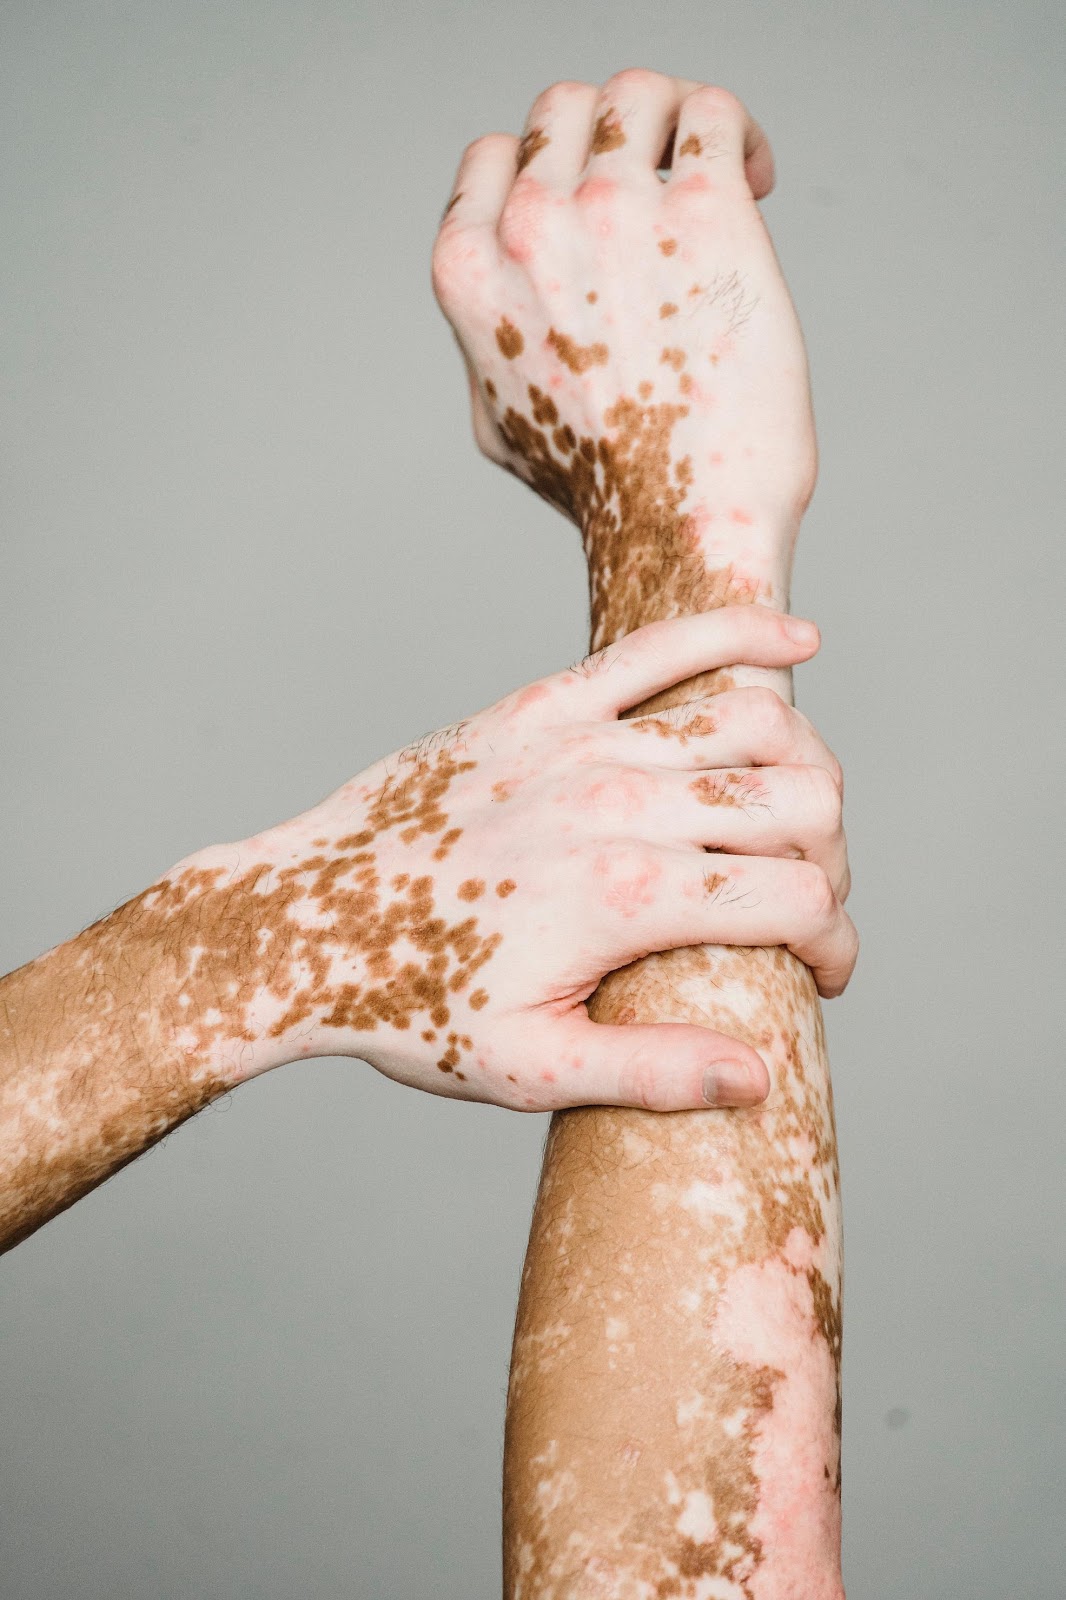 Signs that vitiligo is spreading to other parts of your body